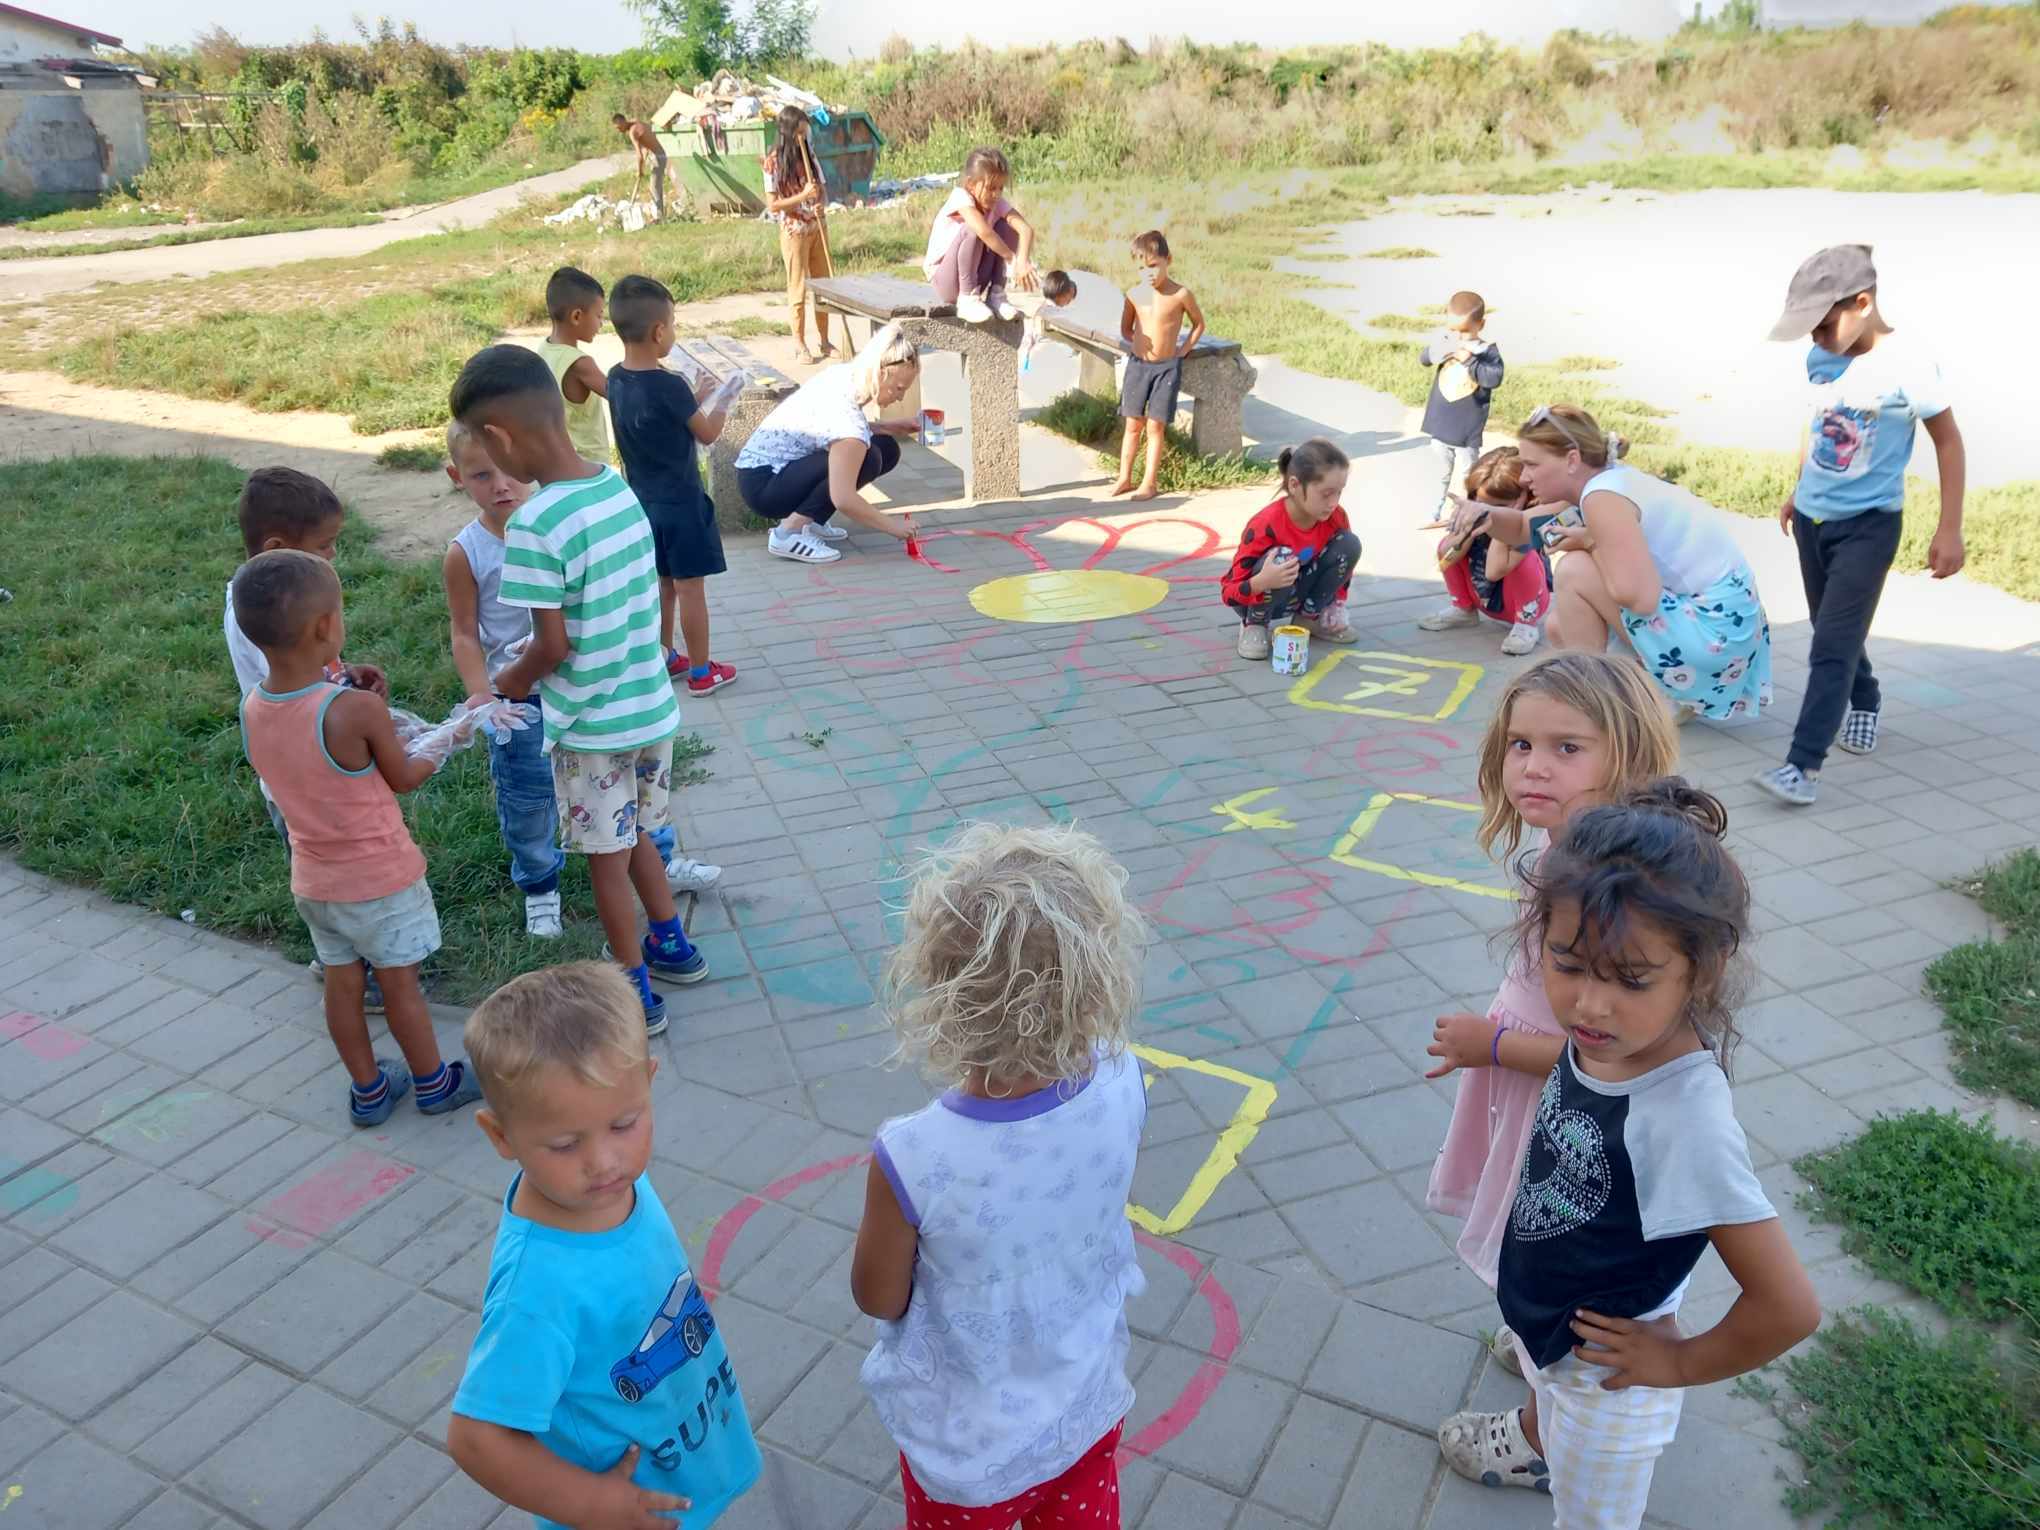 Hopscotch – making our surroundings more beautiful